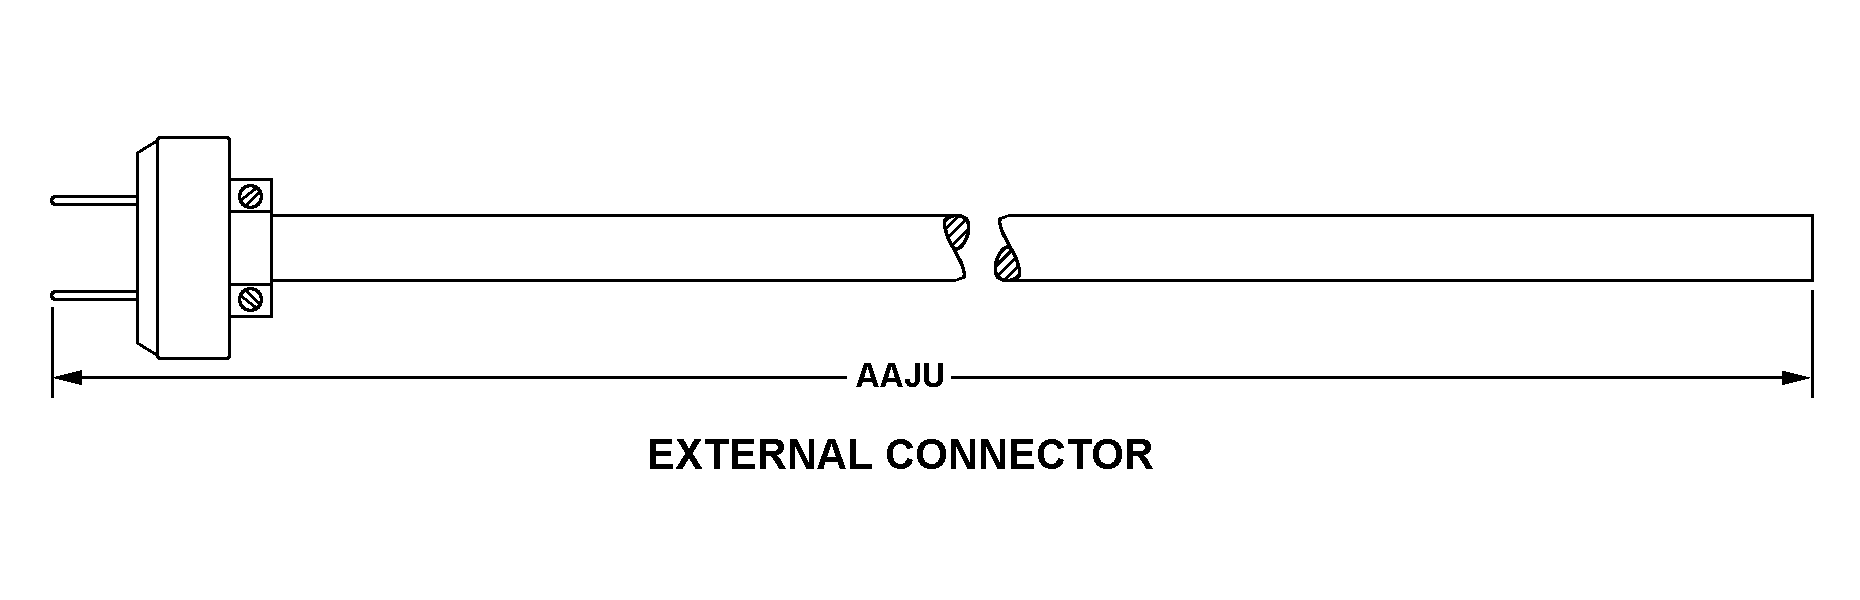 EXTERNAL CONNECTOR style nsn 5995-01-237-4351